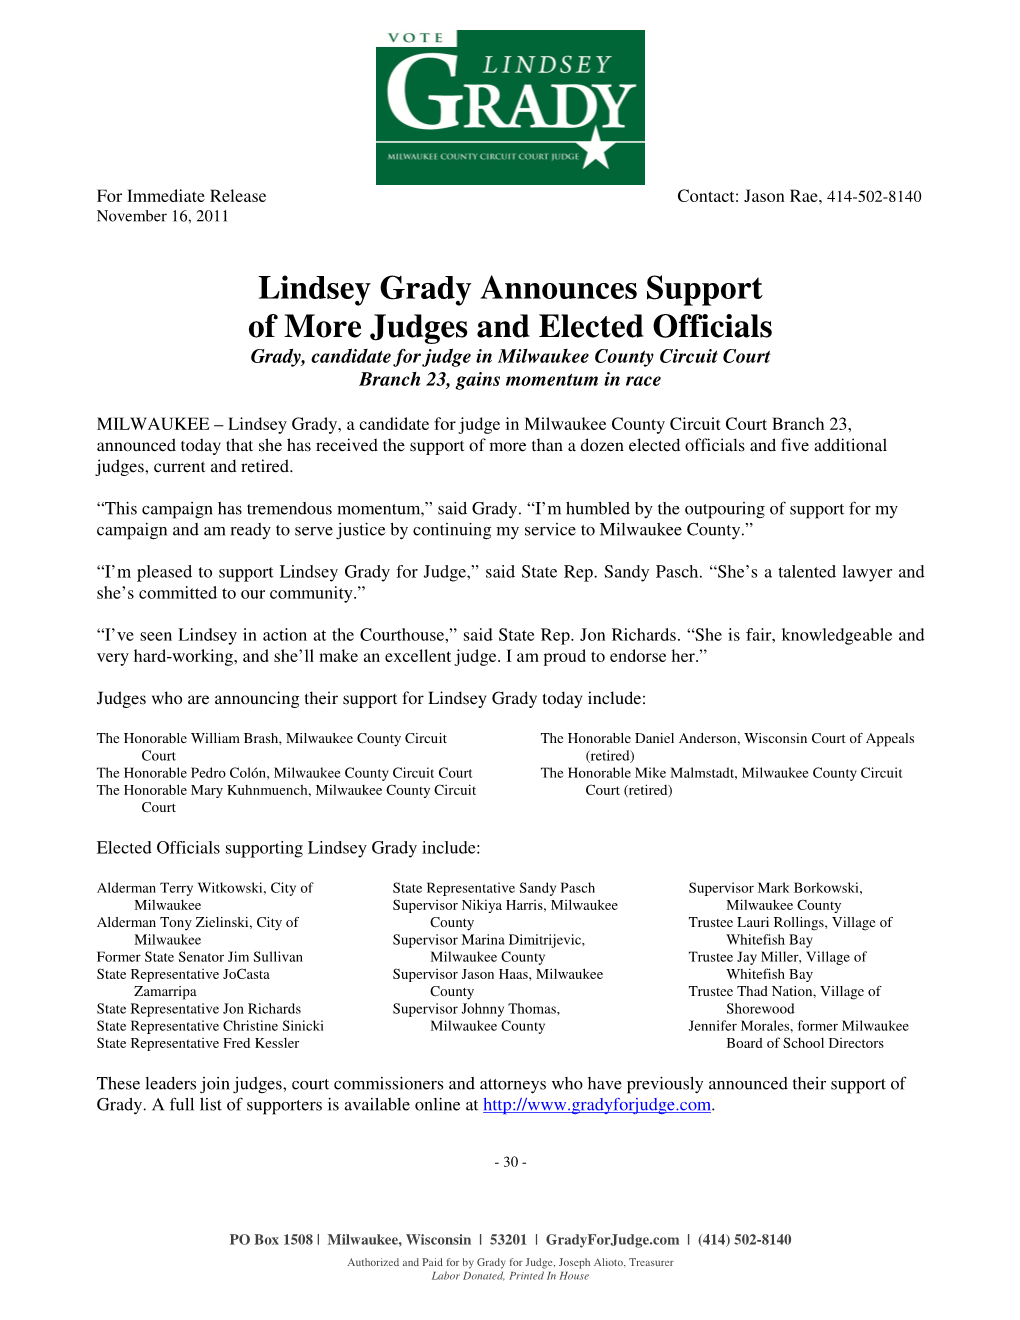 Lindsey Grady Announces Support of More Judges and Elected Officials Grady, Candidate for Judge in Milwaukee County Circuit Court Branch 23, Gains Momentum in Race